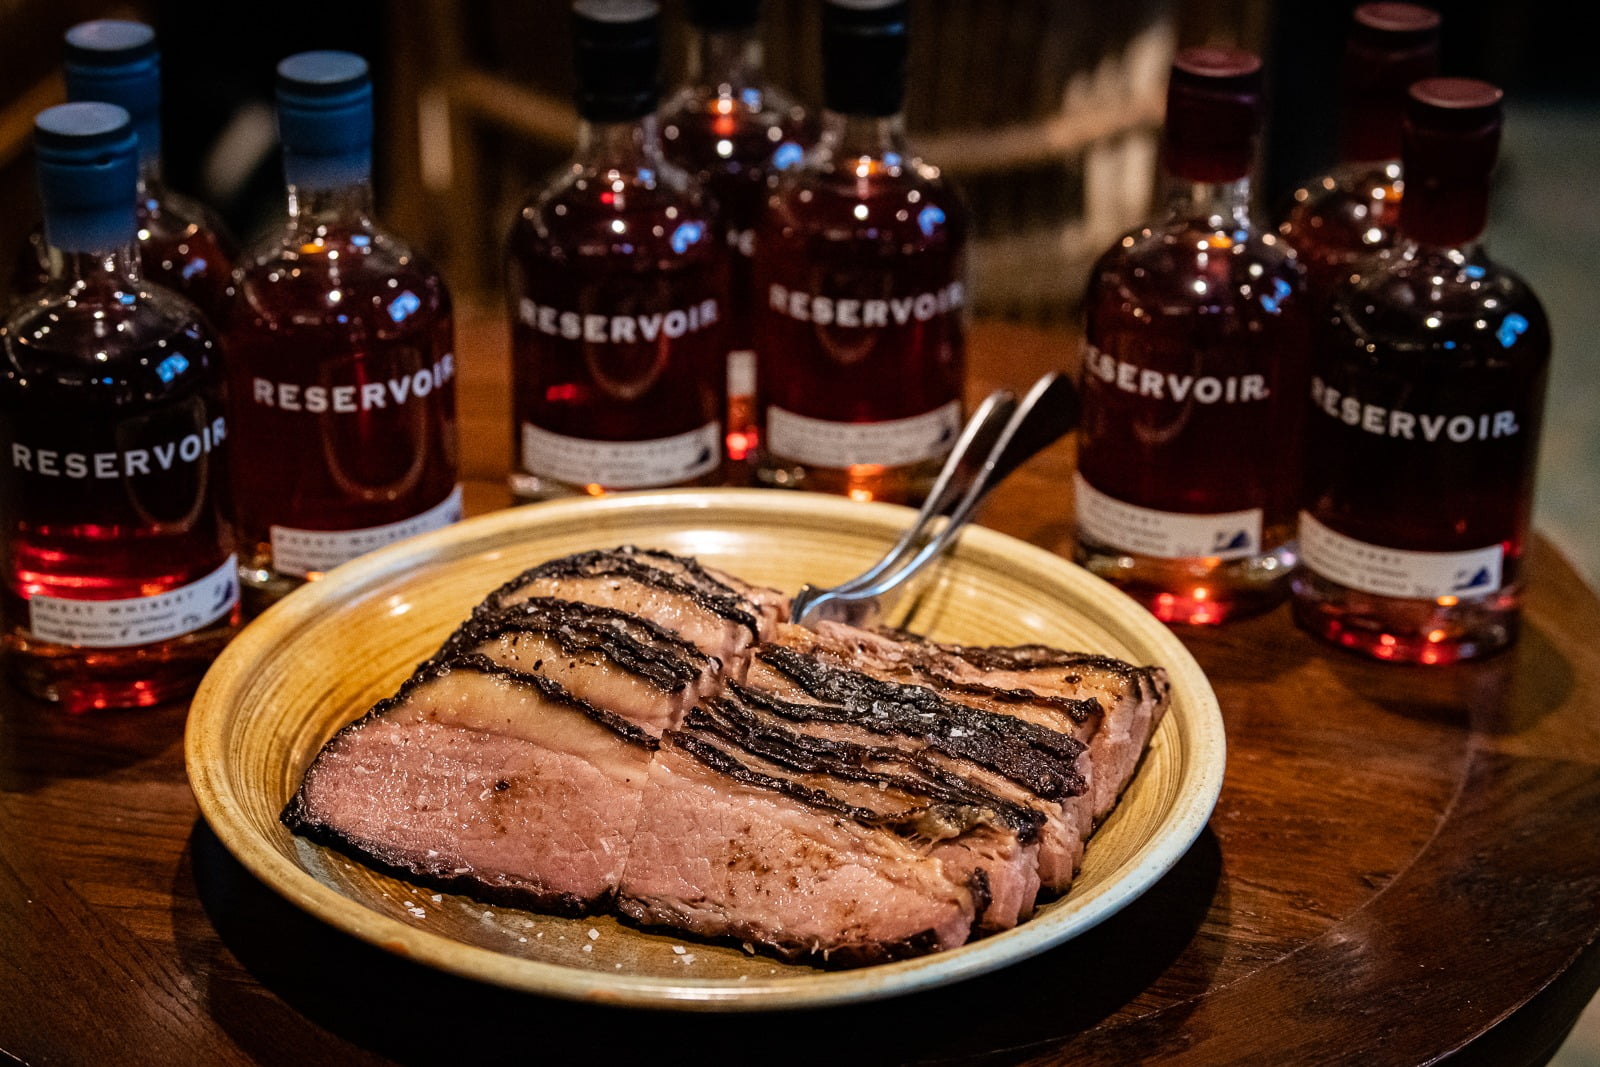 NOLA's Famous Beef Brisket Surrounded by Reservoir Distillery Whiskey Bottles